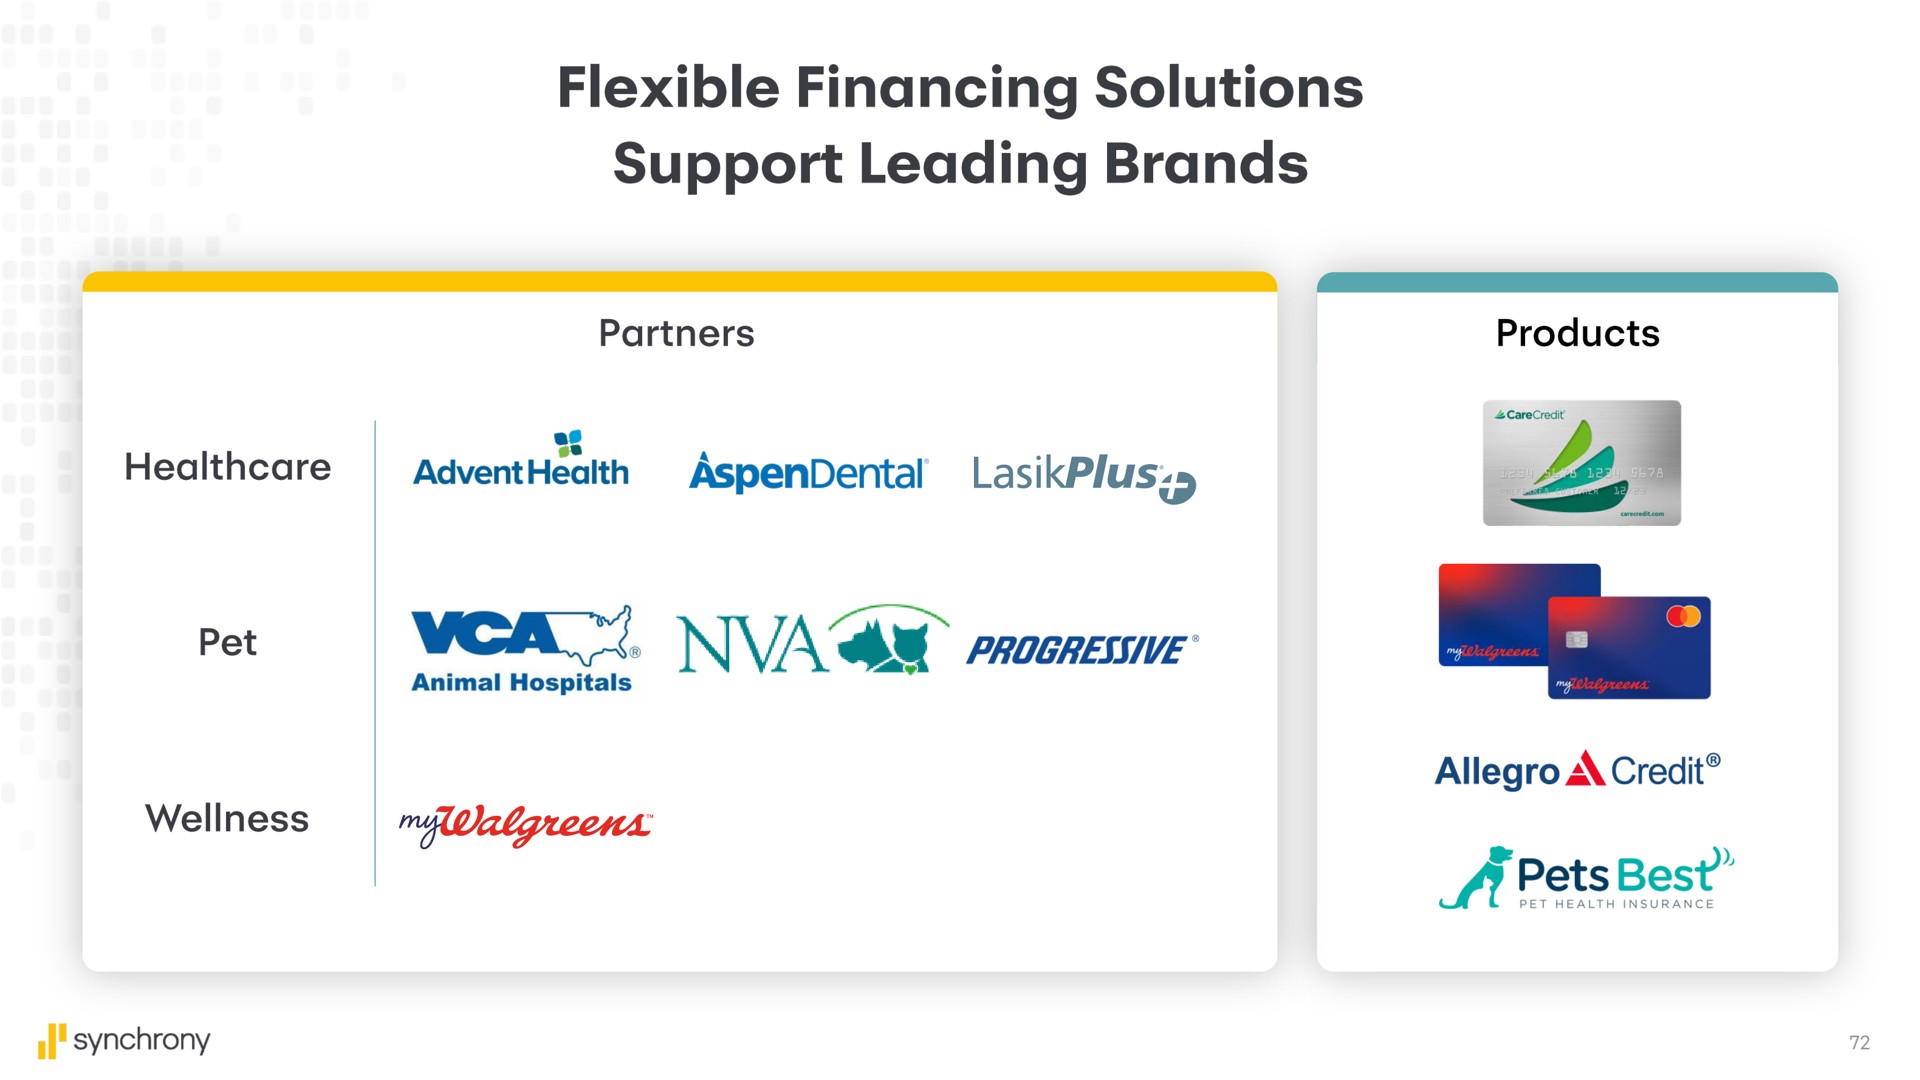 flexible financing solutions support leading brands | Synchrony Financial